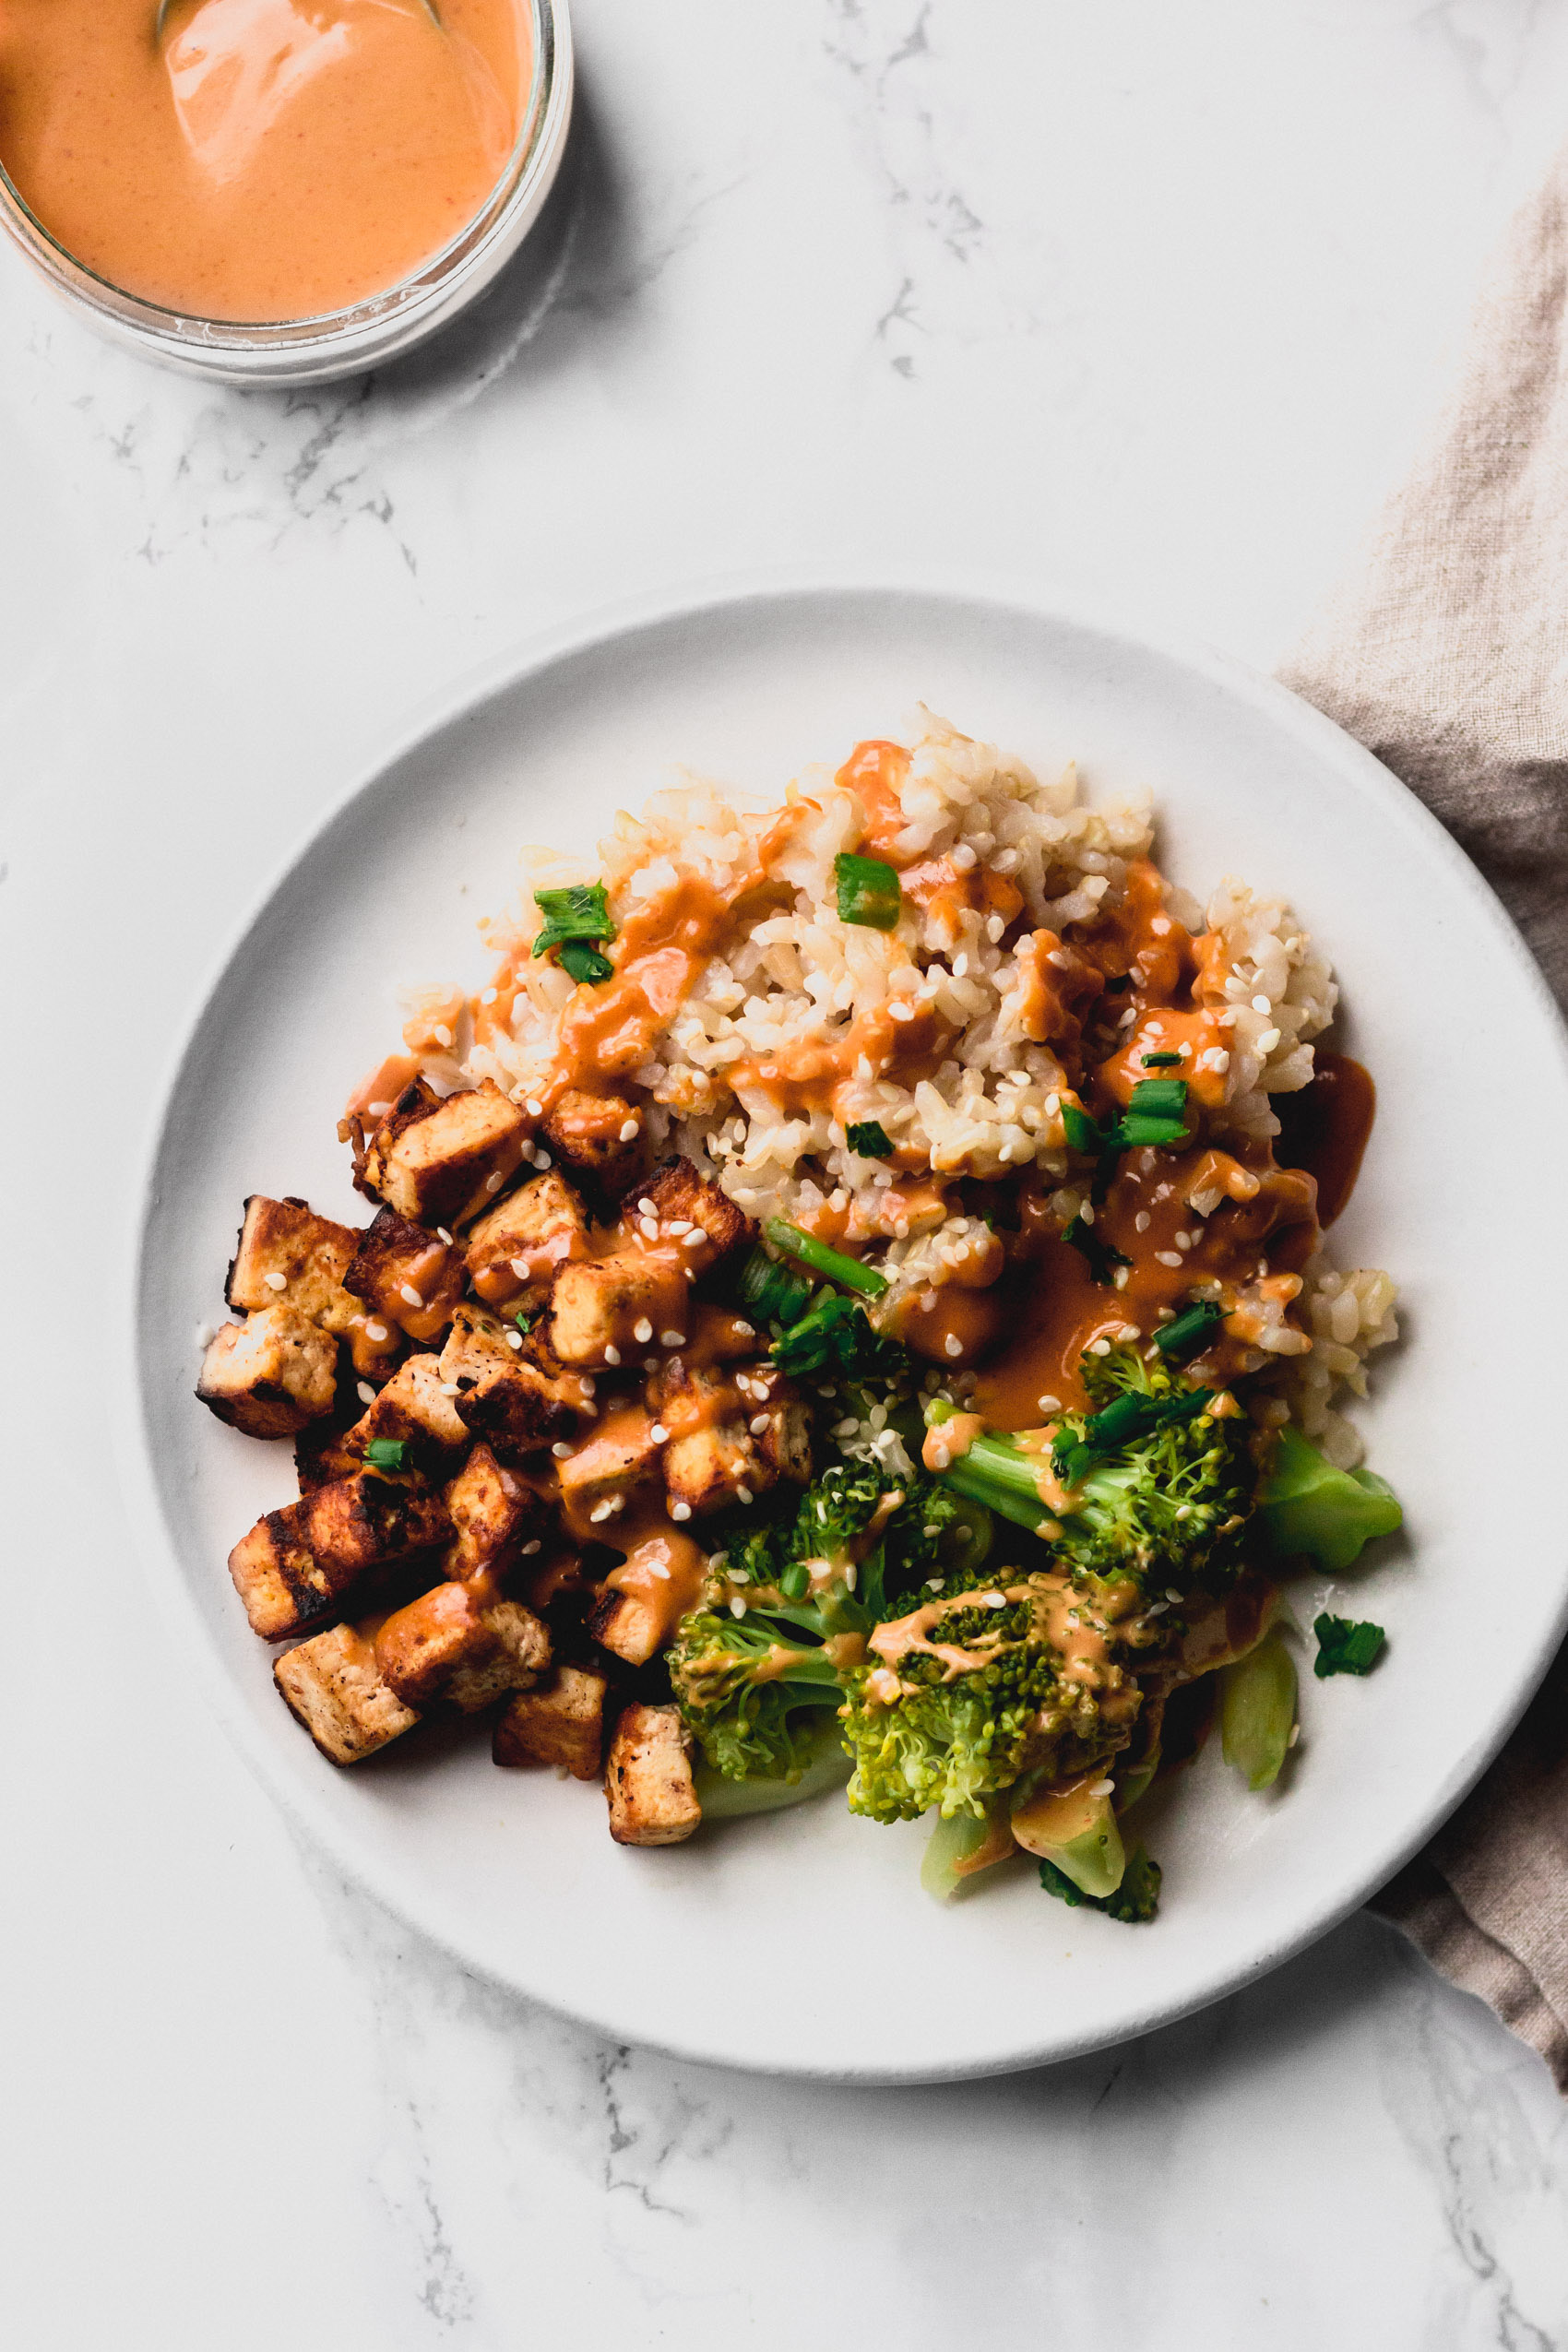 a plate of rice served with tofu, broccoli and a vegan peanut sauce